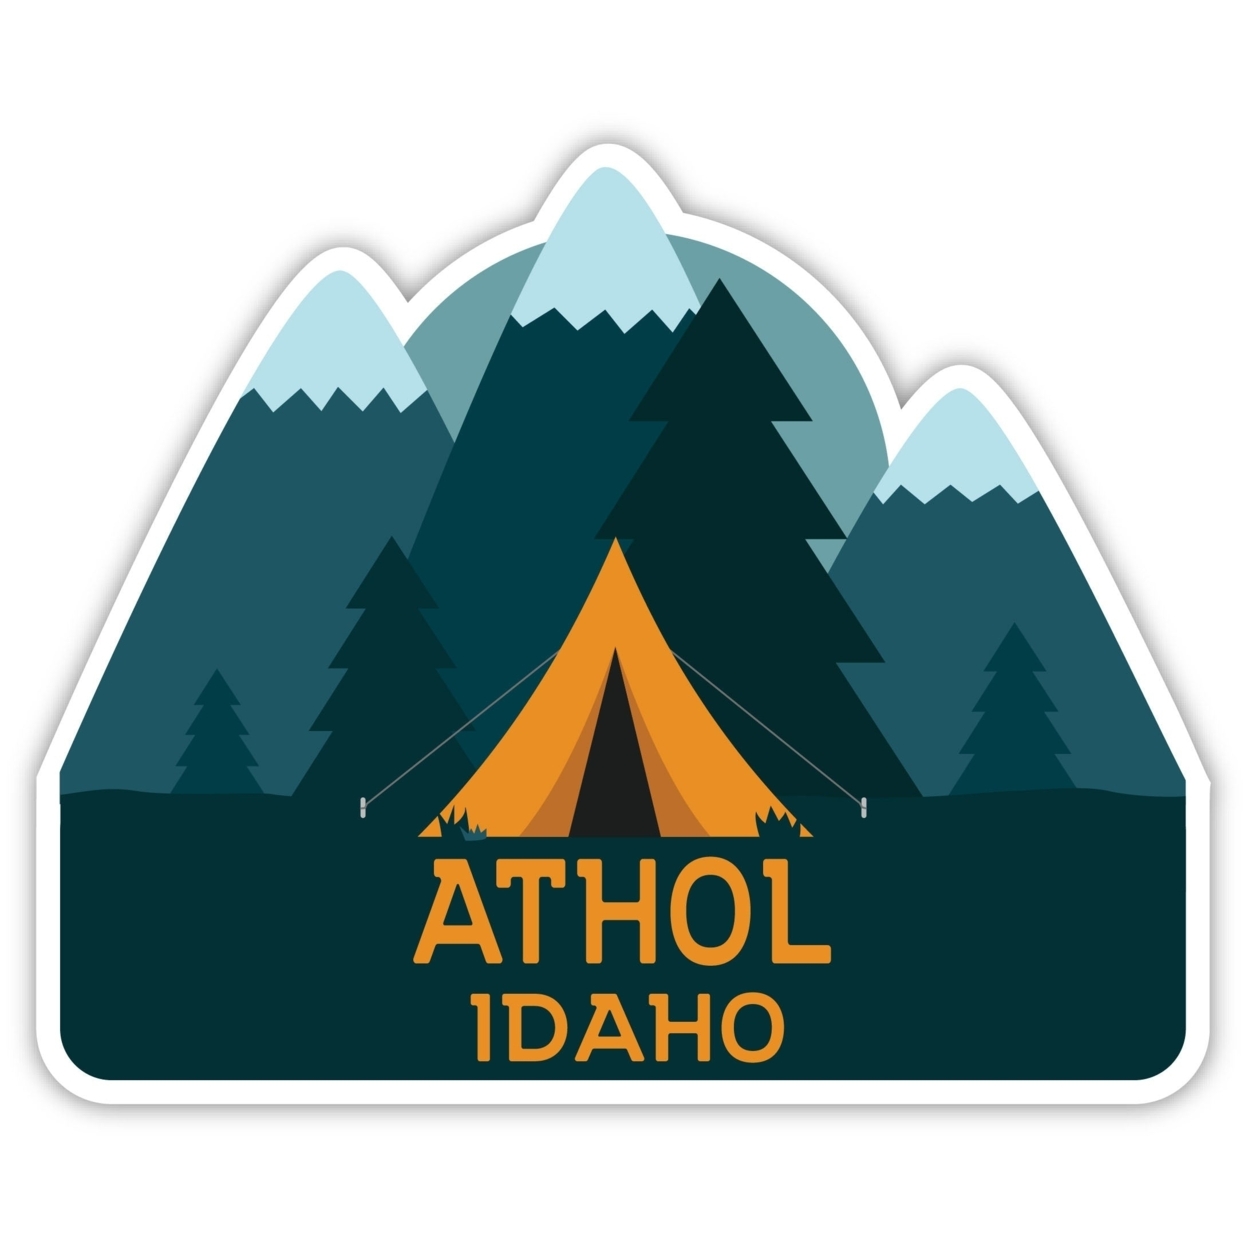 Athol Idaho Souvenir Decorative Stickers (Choose Theme And Size) - 4-Pack, 10-Inch, Tent